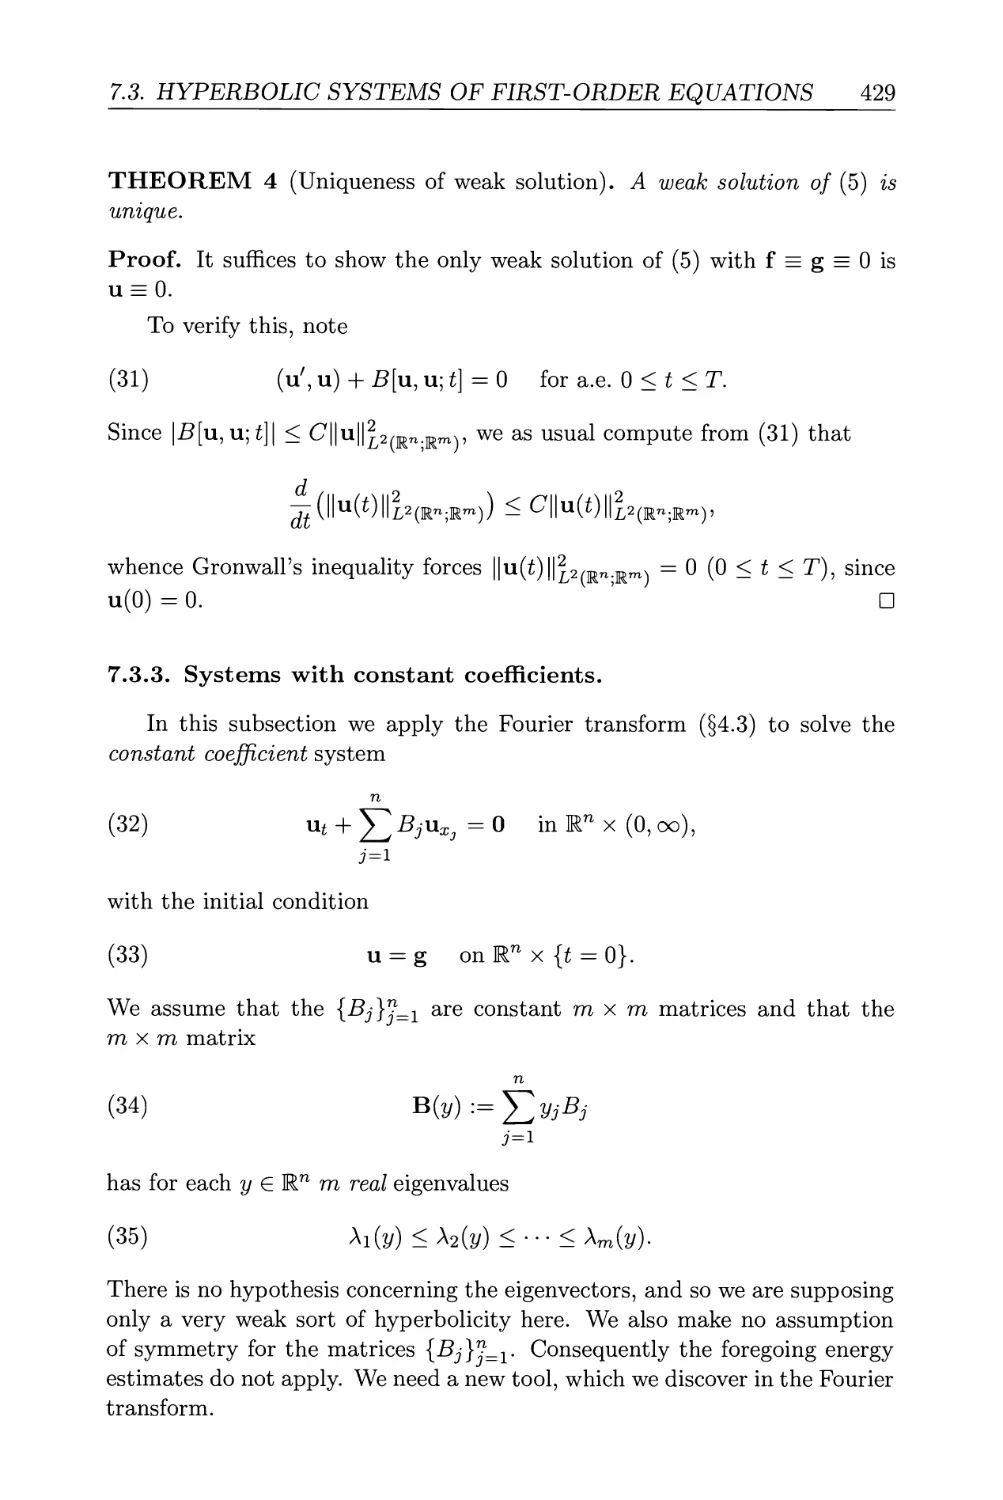 7.3.3. Systems with constant coefficients